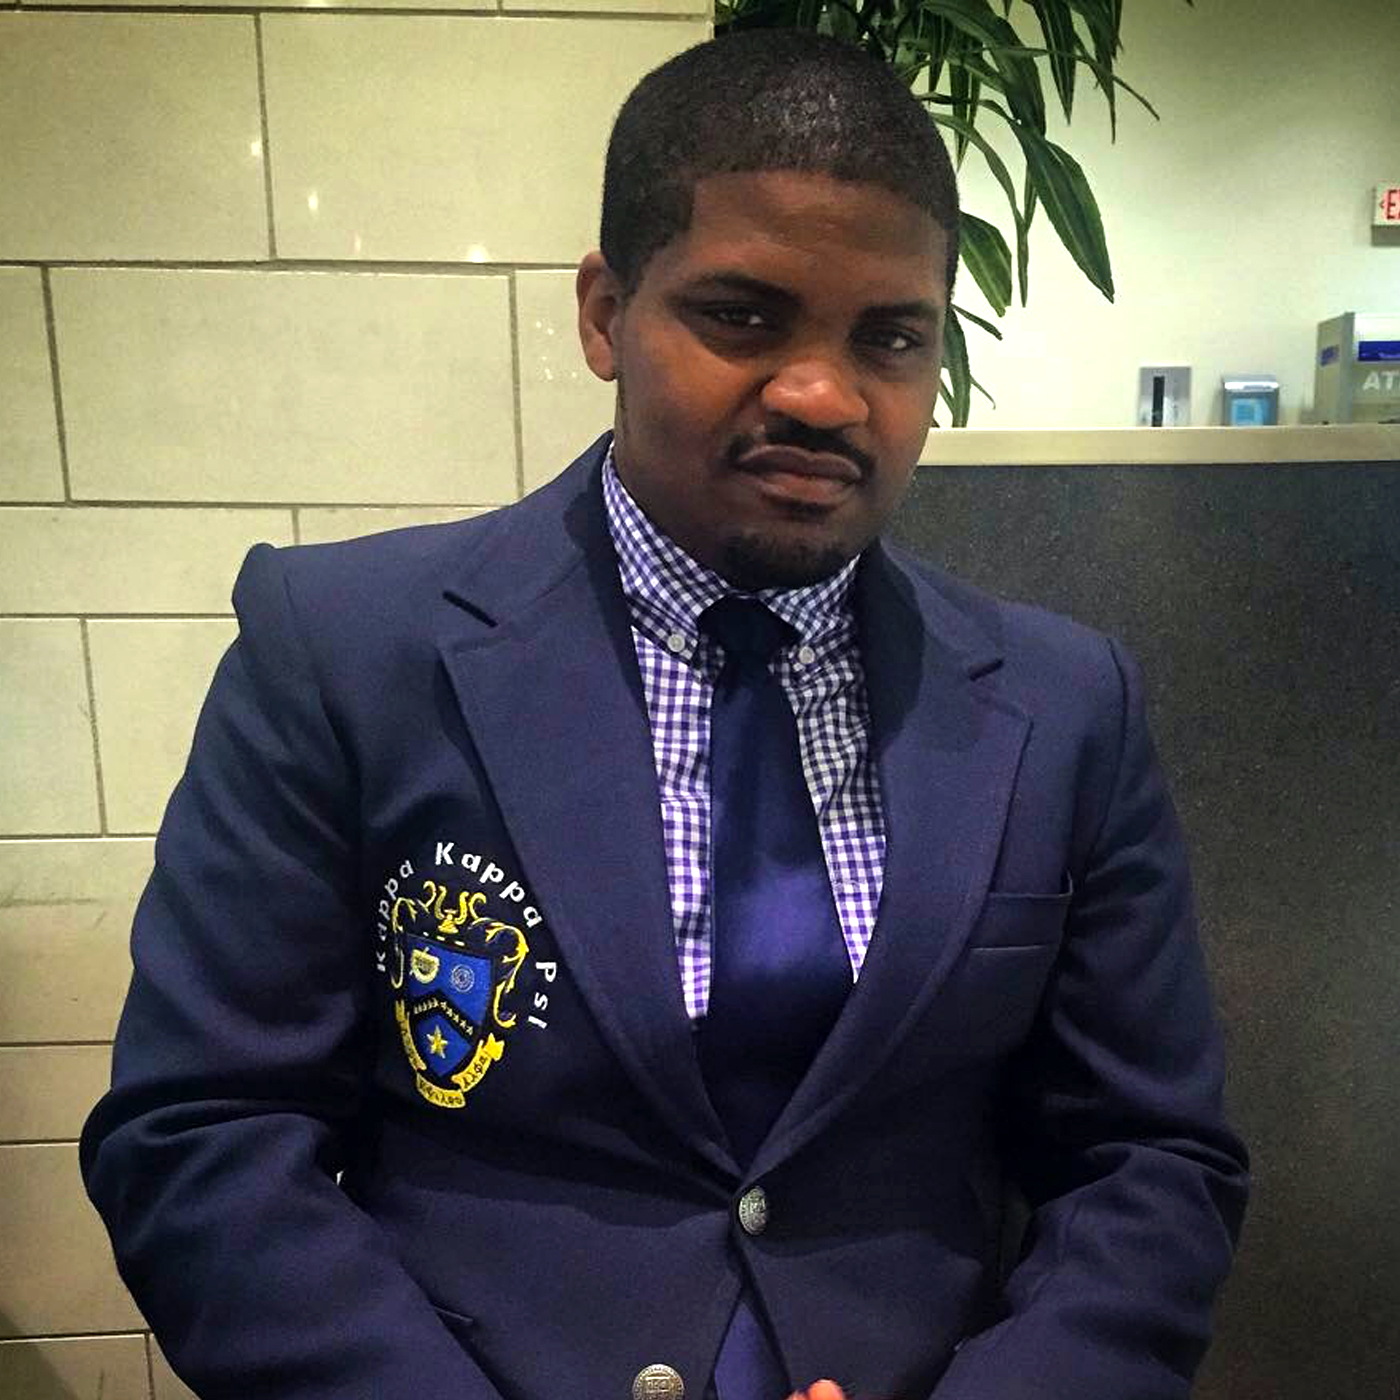 HL 043: Deon Rhode’s Quest to See Every HBCU in the Nation